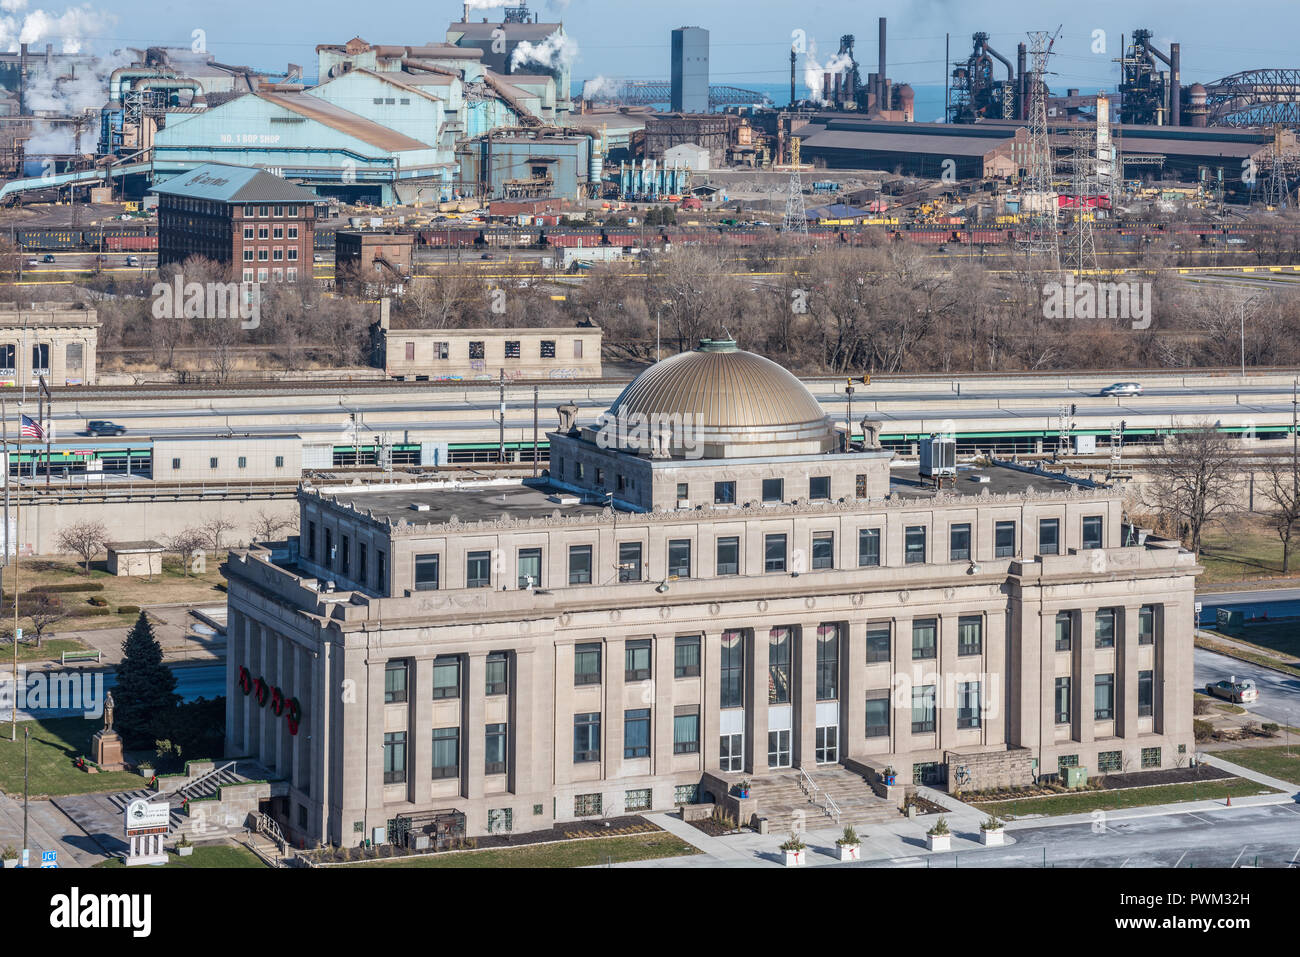 Aerial view of municipal building and steel mills in downtown Gary Stock Photo